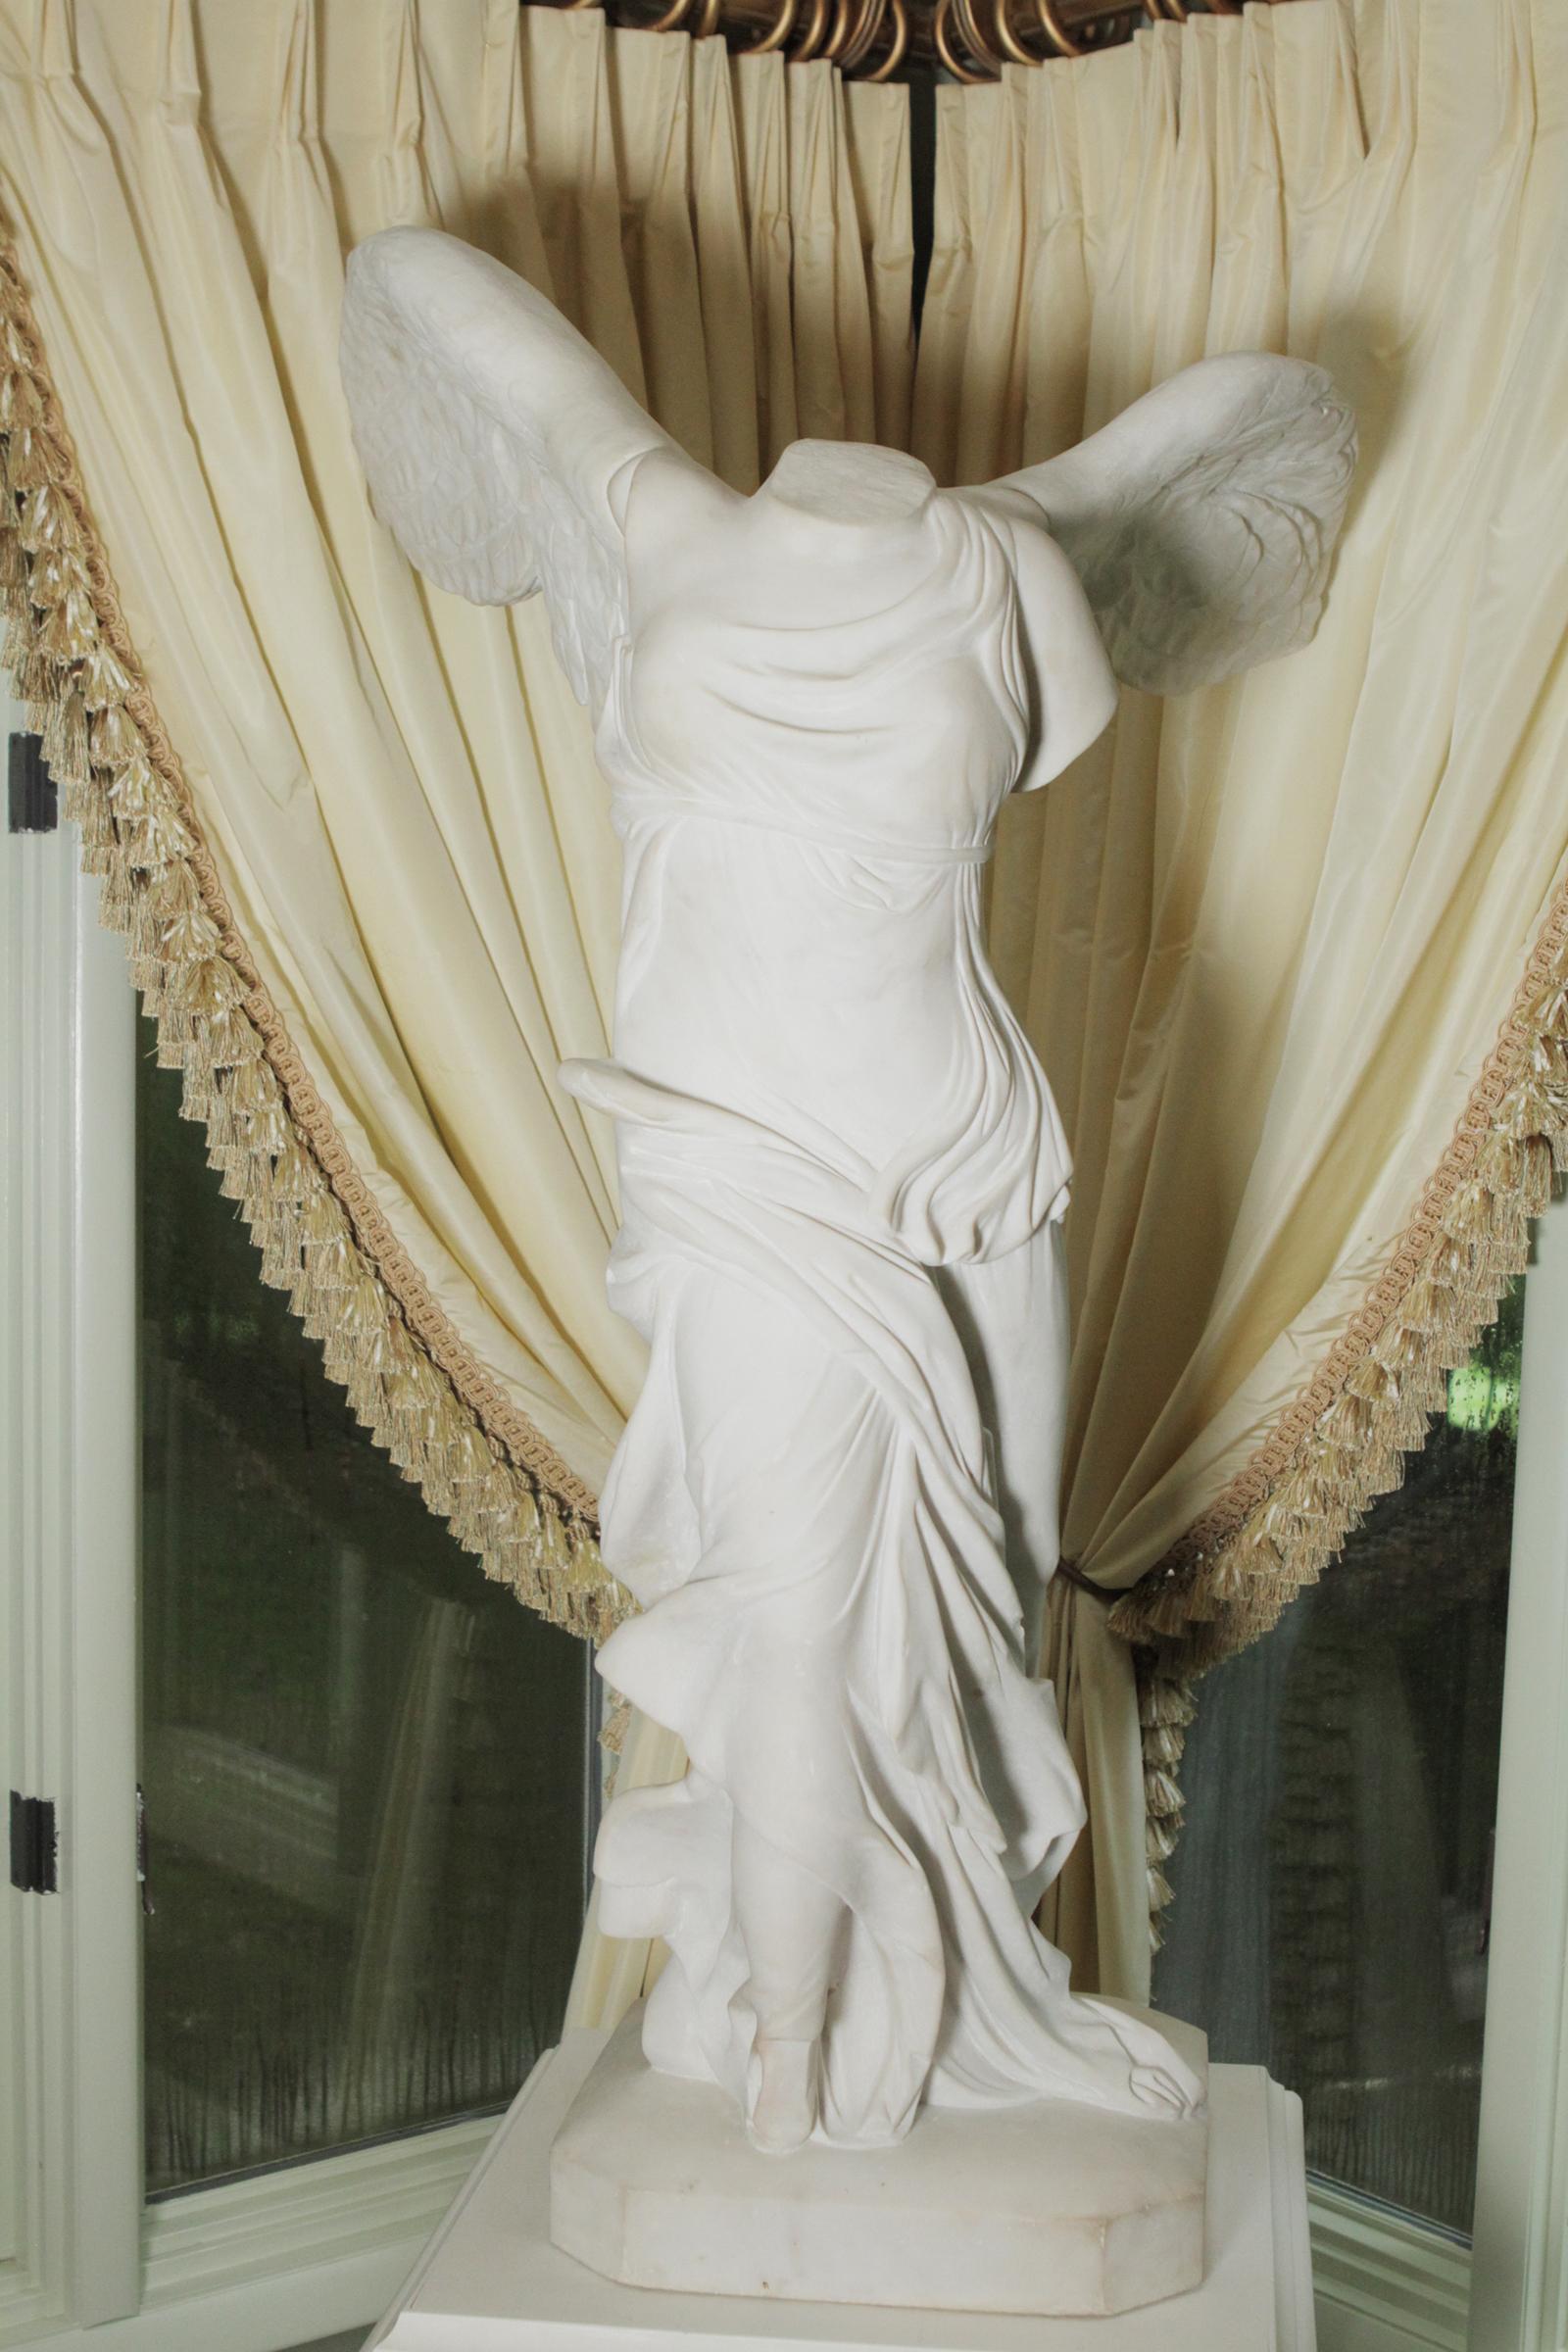 19th century Italian Nike Winged Victory monumental marble figure on custom wood stand

 The Winged Victory of Samothrace, also called the Nike of Samothrace, is a marble Hellenistic sculpture of Nike (the Greek goddess of victory), that was